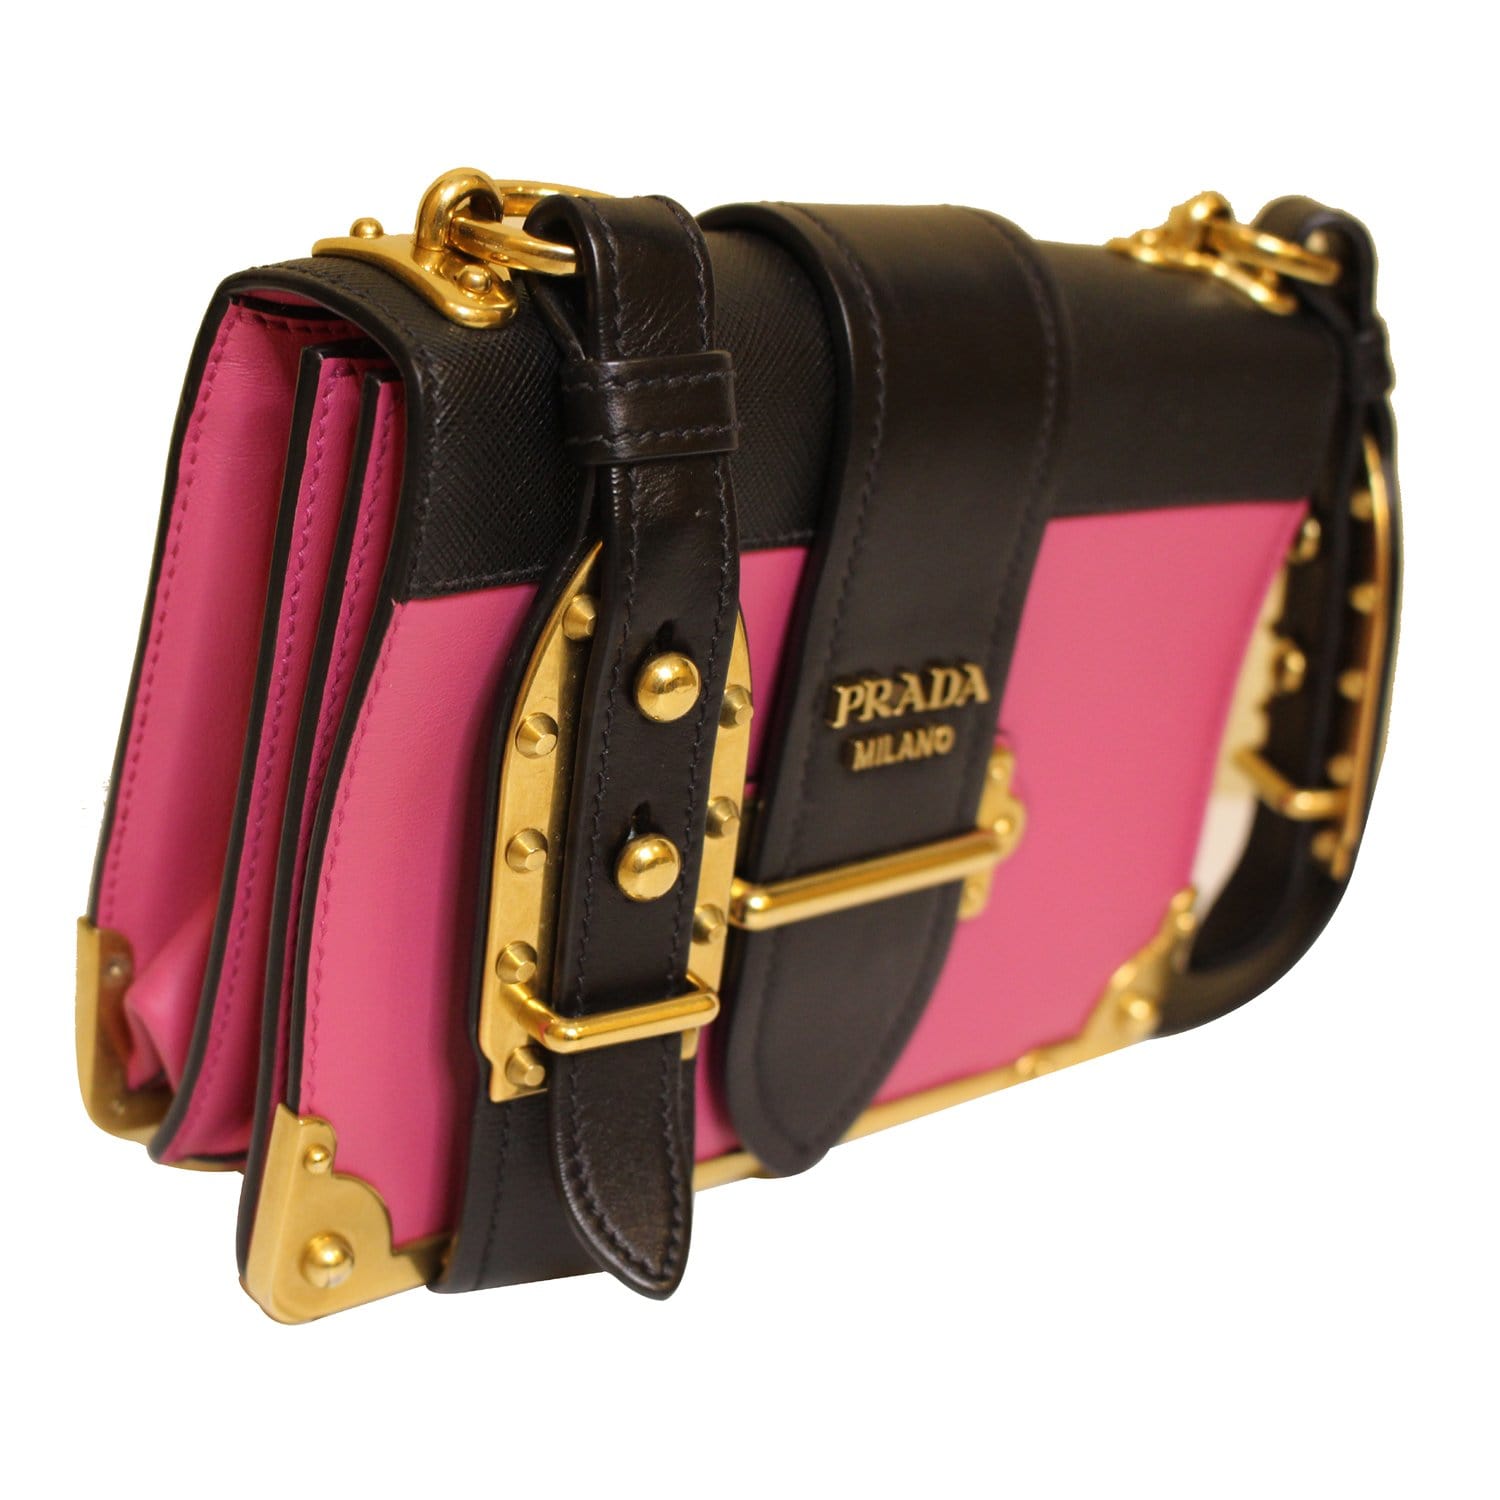 Prada - Cahier Shoulder Bag - Women - Calf Leather - One Size in